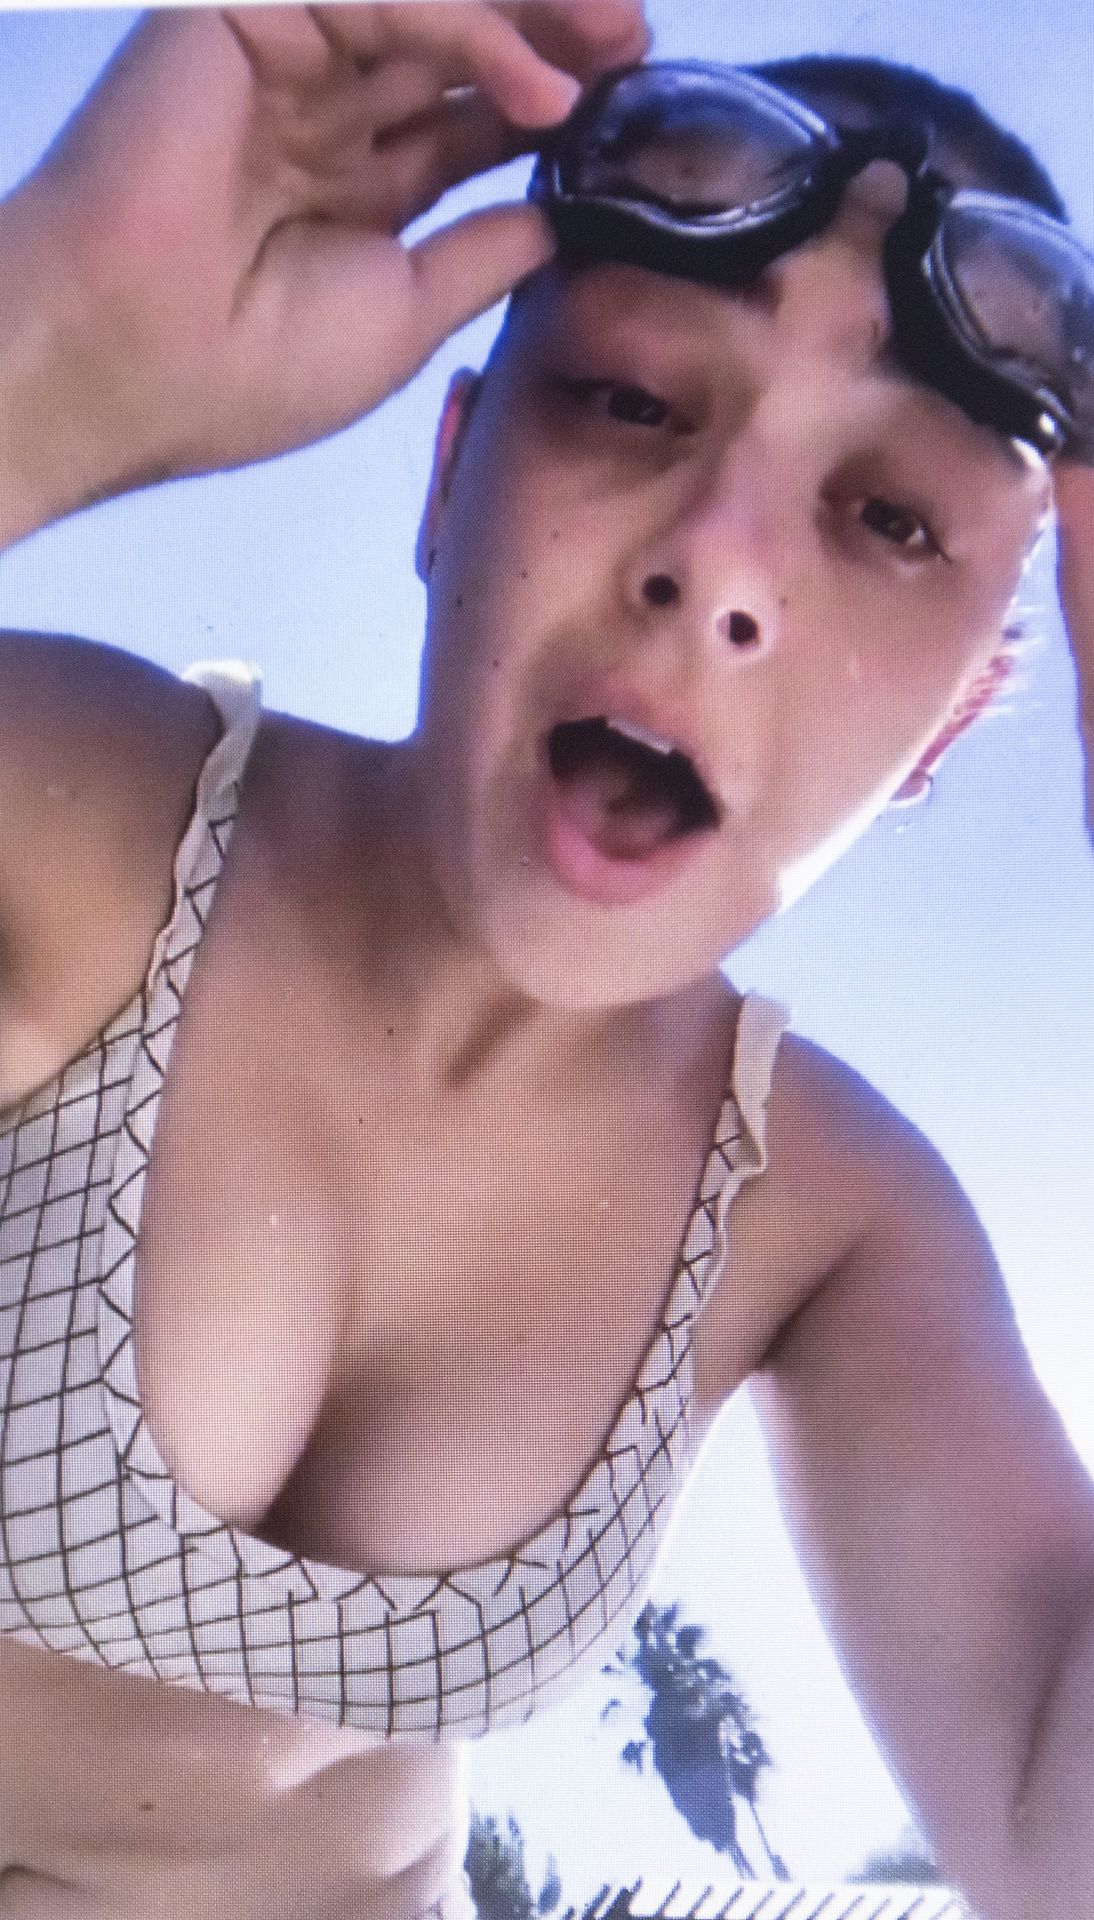 Charli XCX Shows Her Tits for a New Challenge (16 Pics + Video)